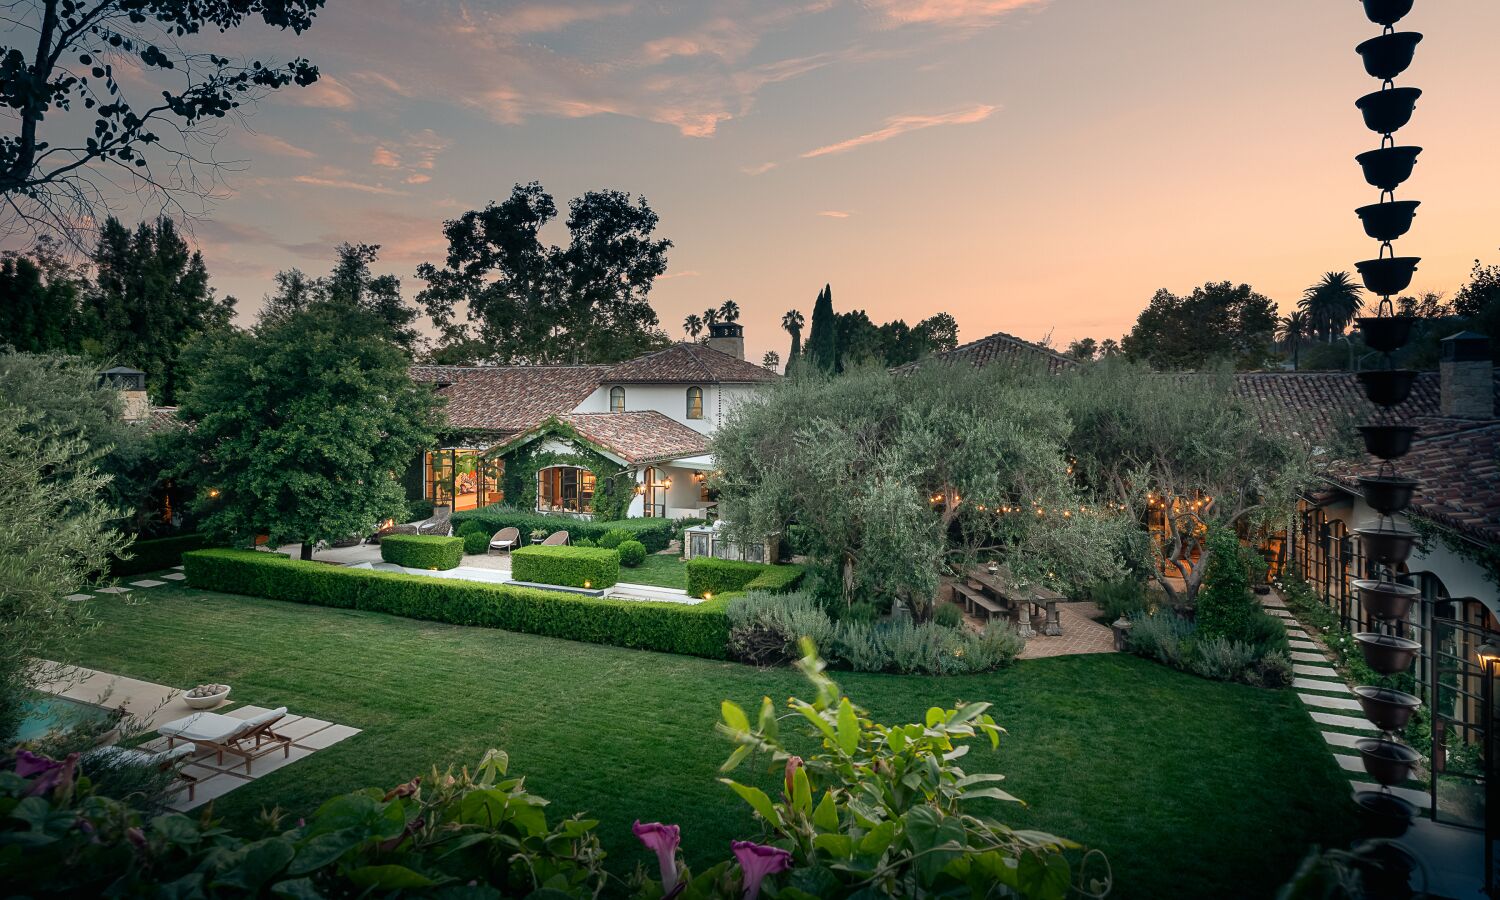 A designer's custom compound sells for $16.55 million, a record